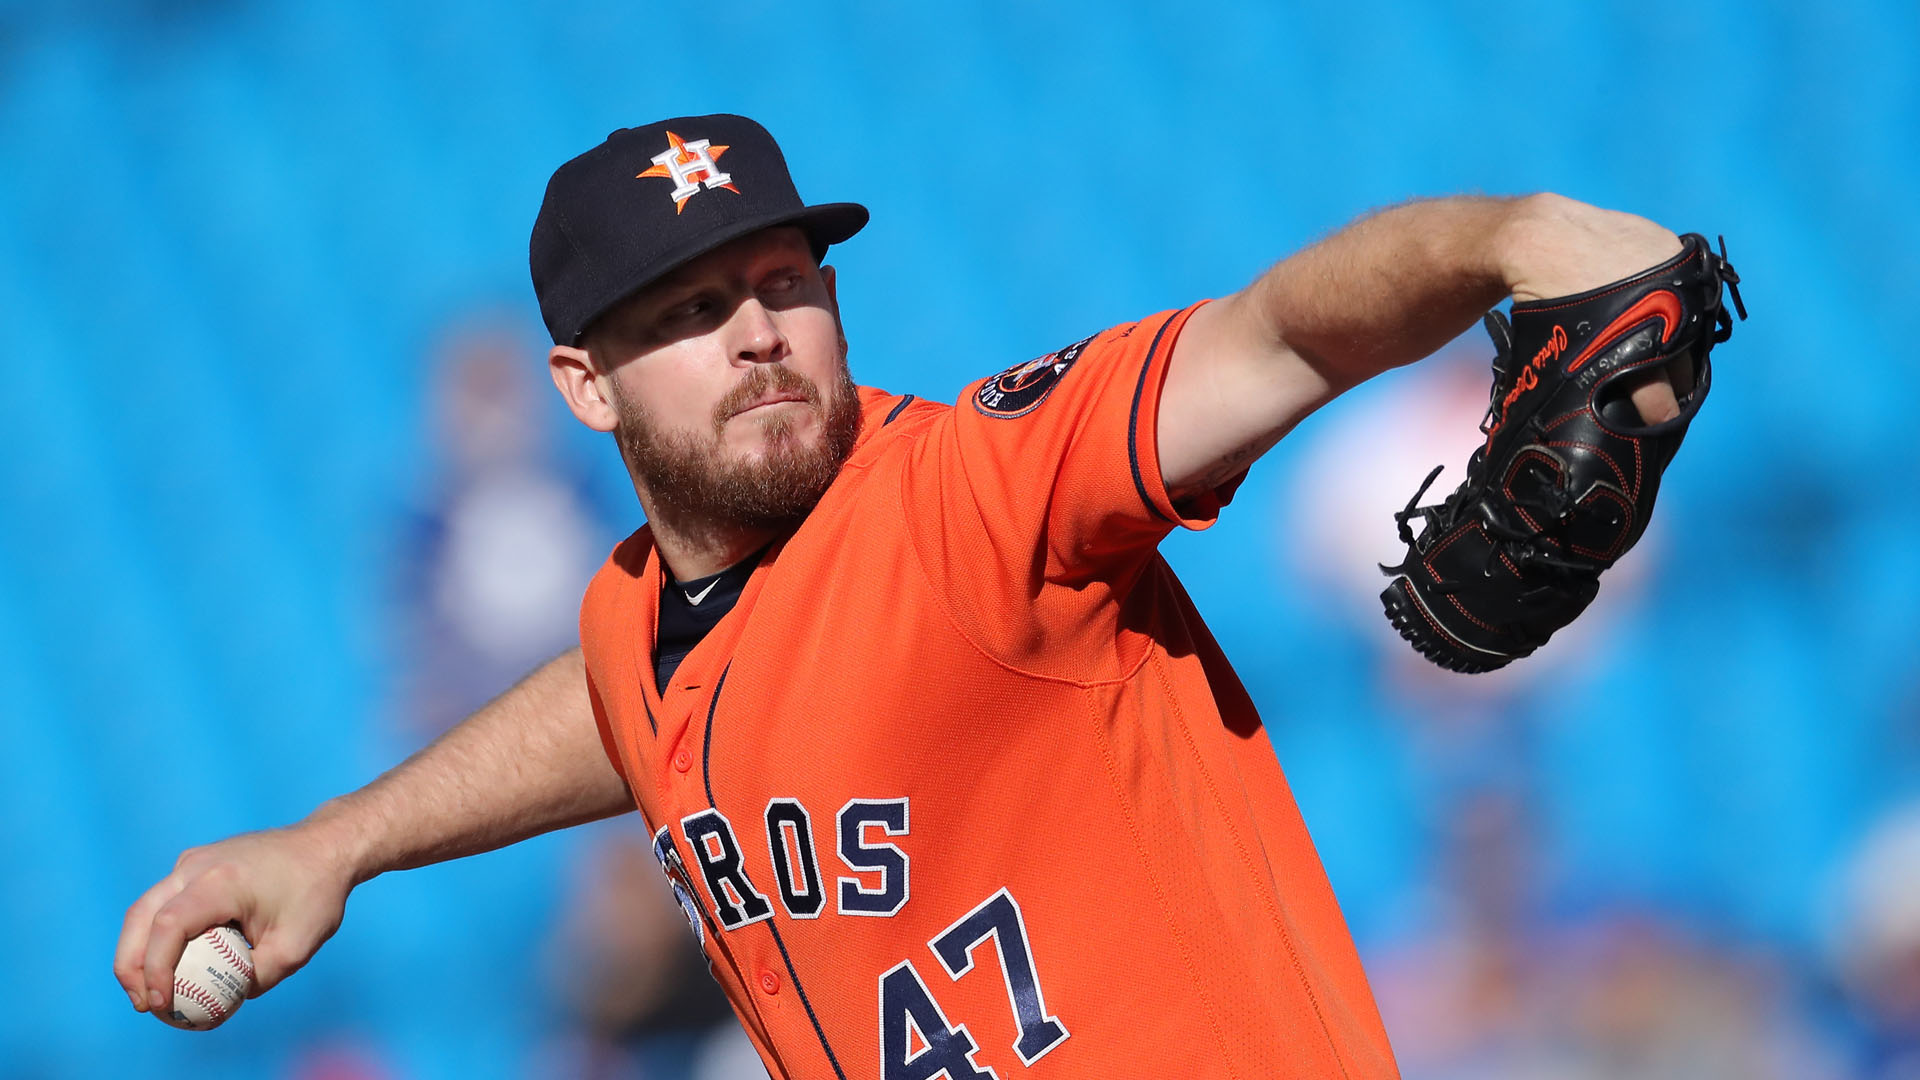 Chris Devenski was an All-Star in 2017. Since then he has a 4.43 ERA in 68 appearances. So what happened?